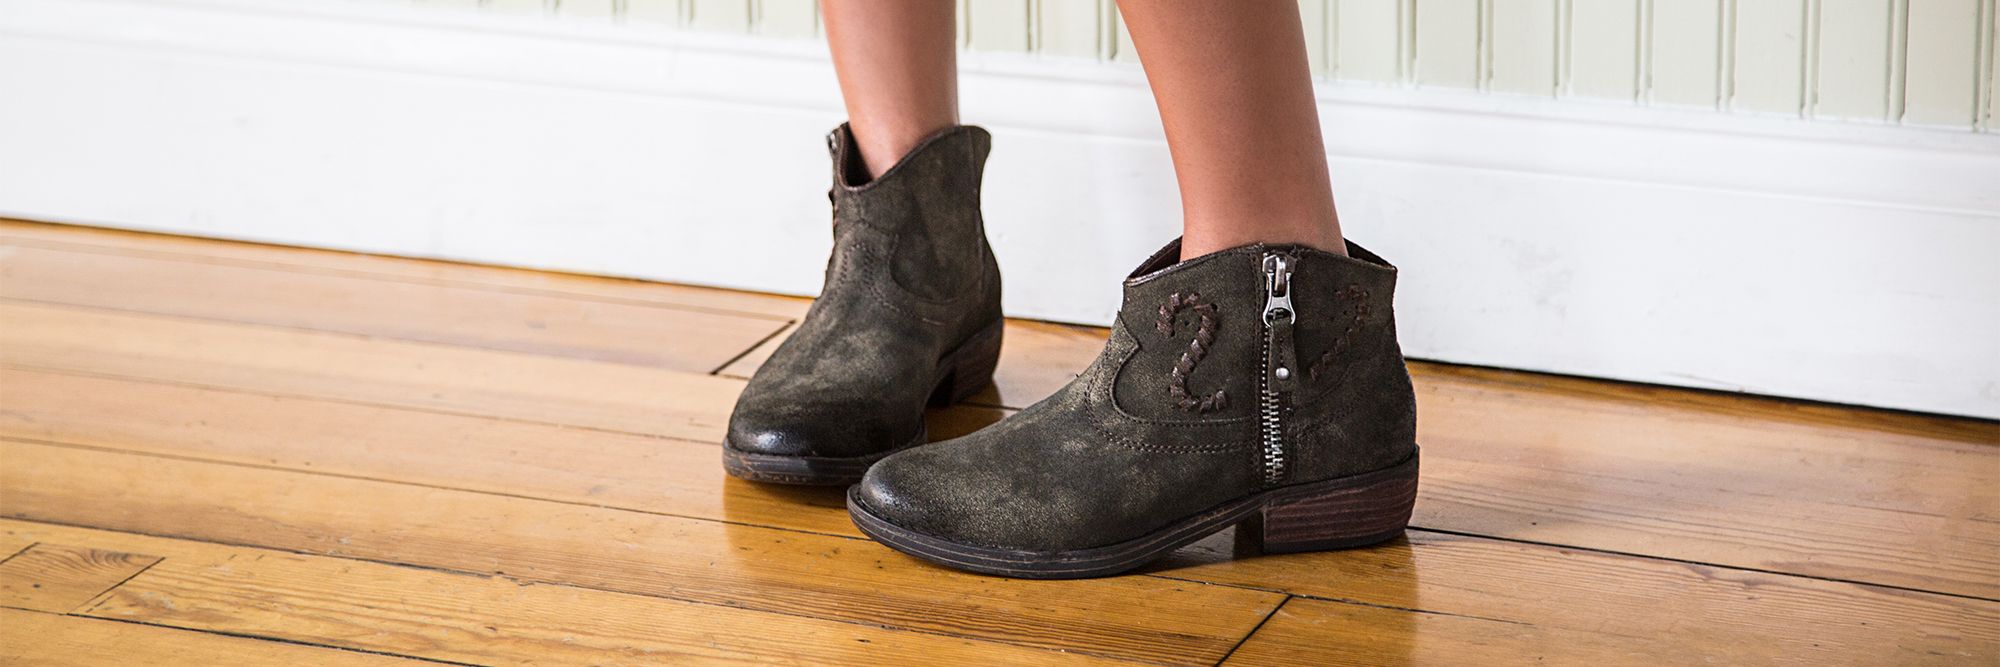 How to Style Boots for Summer